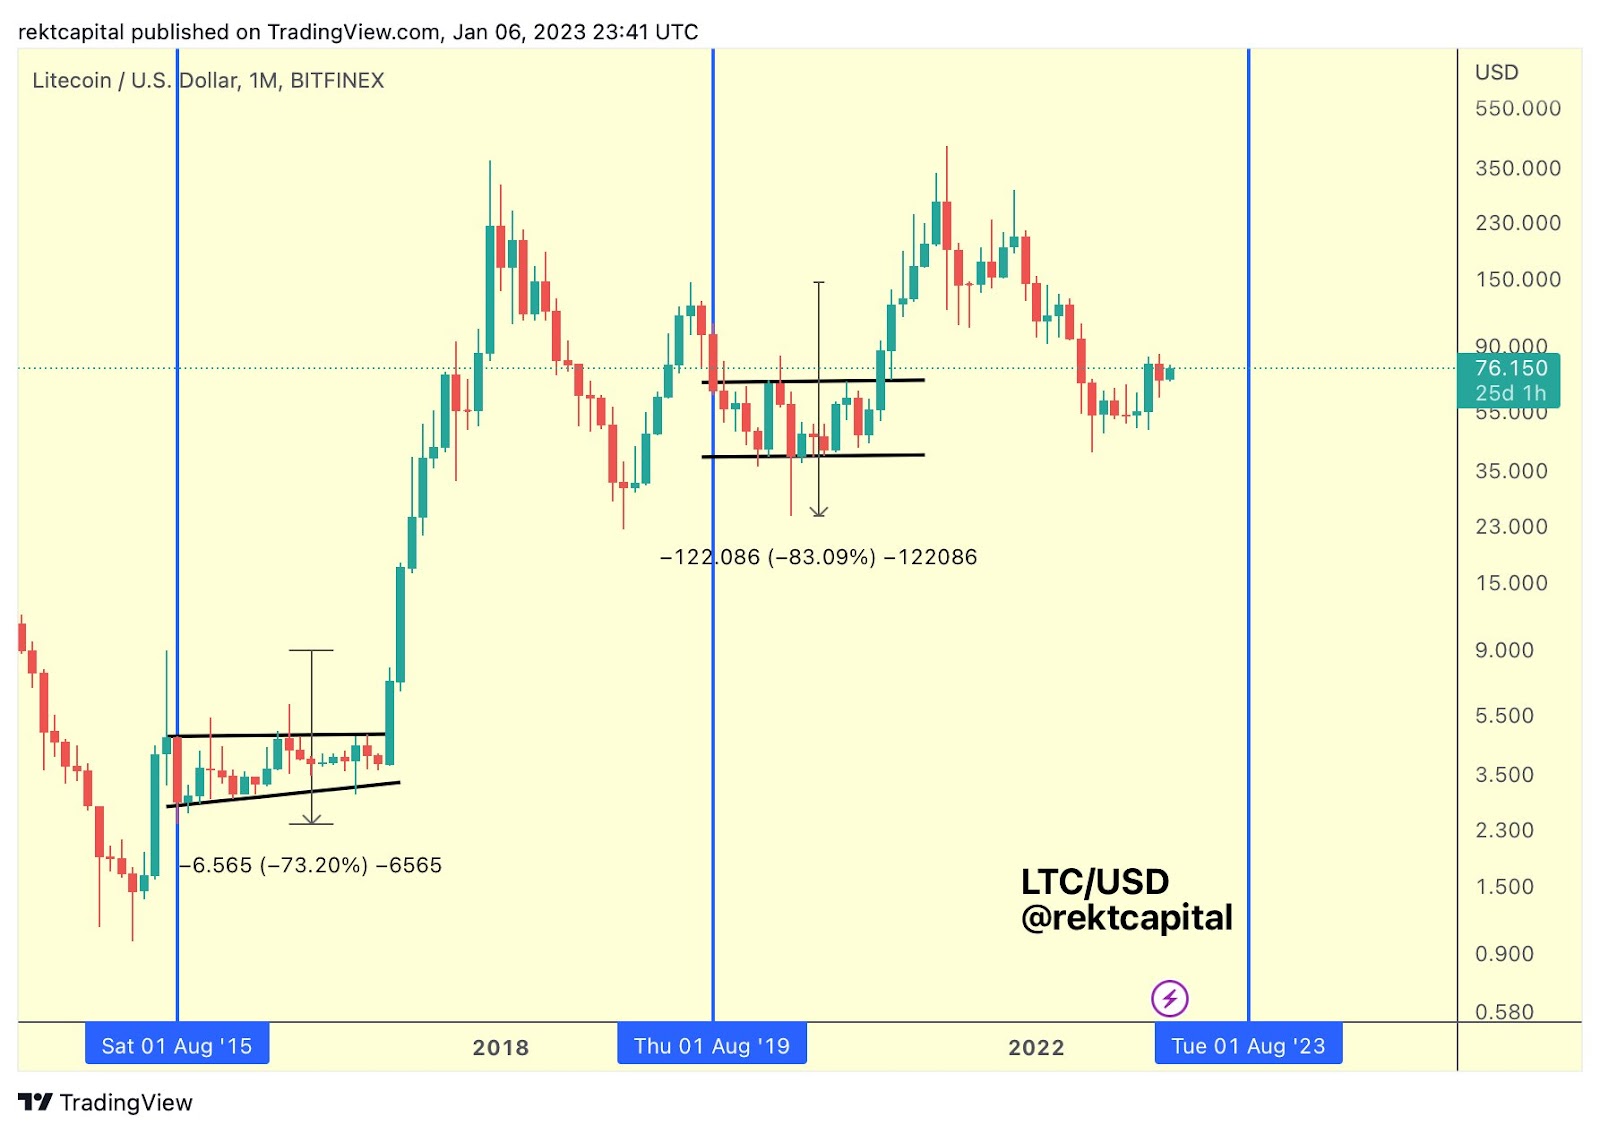 Litecoin (LTC) Halving Is Over, But Where Are Bulls?